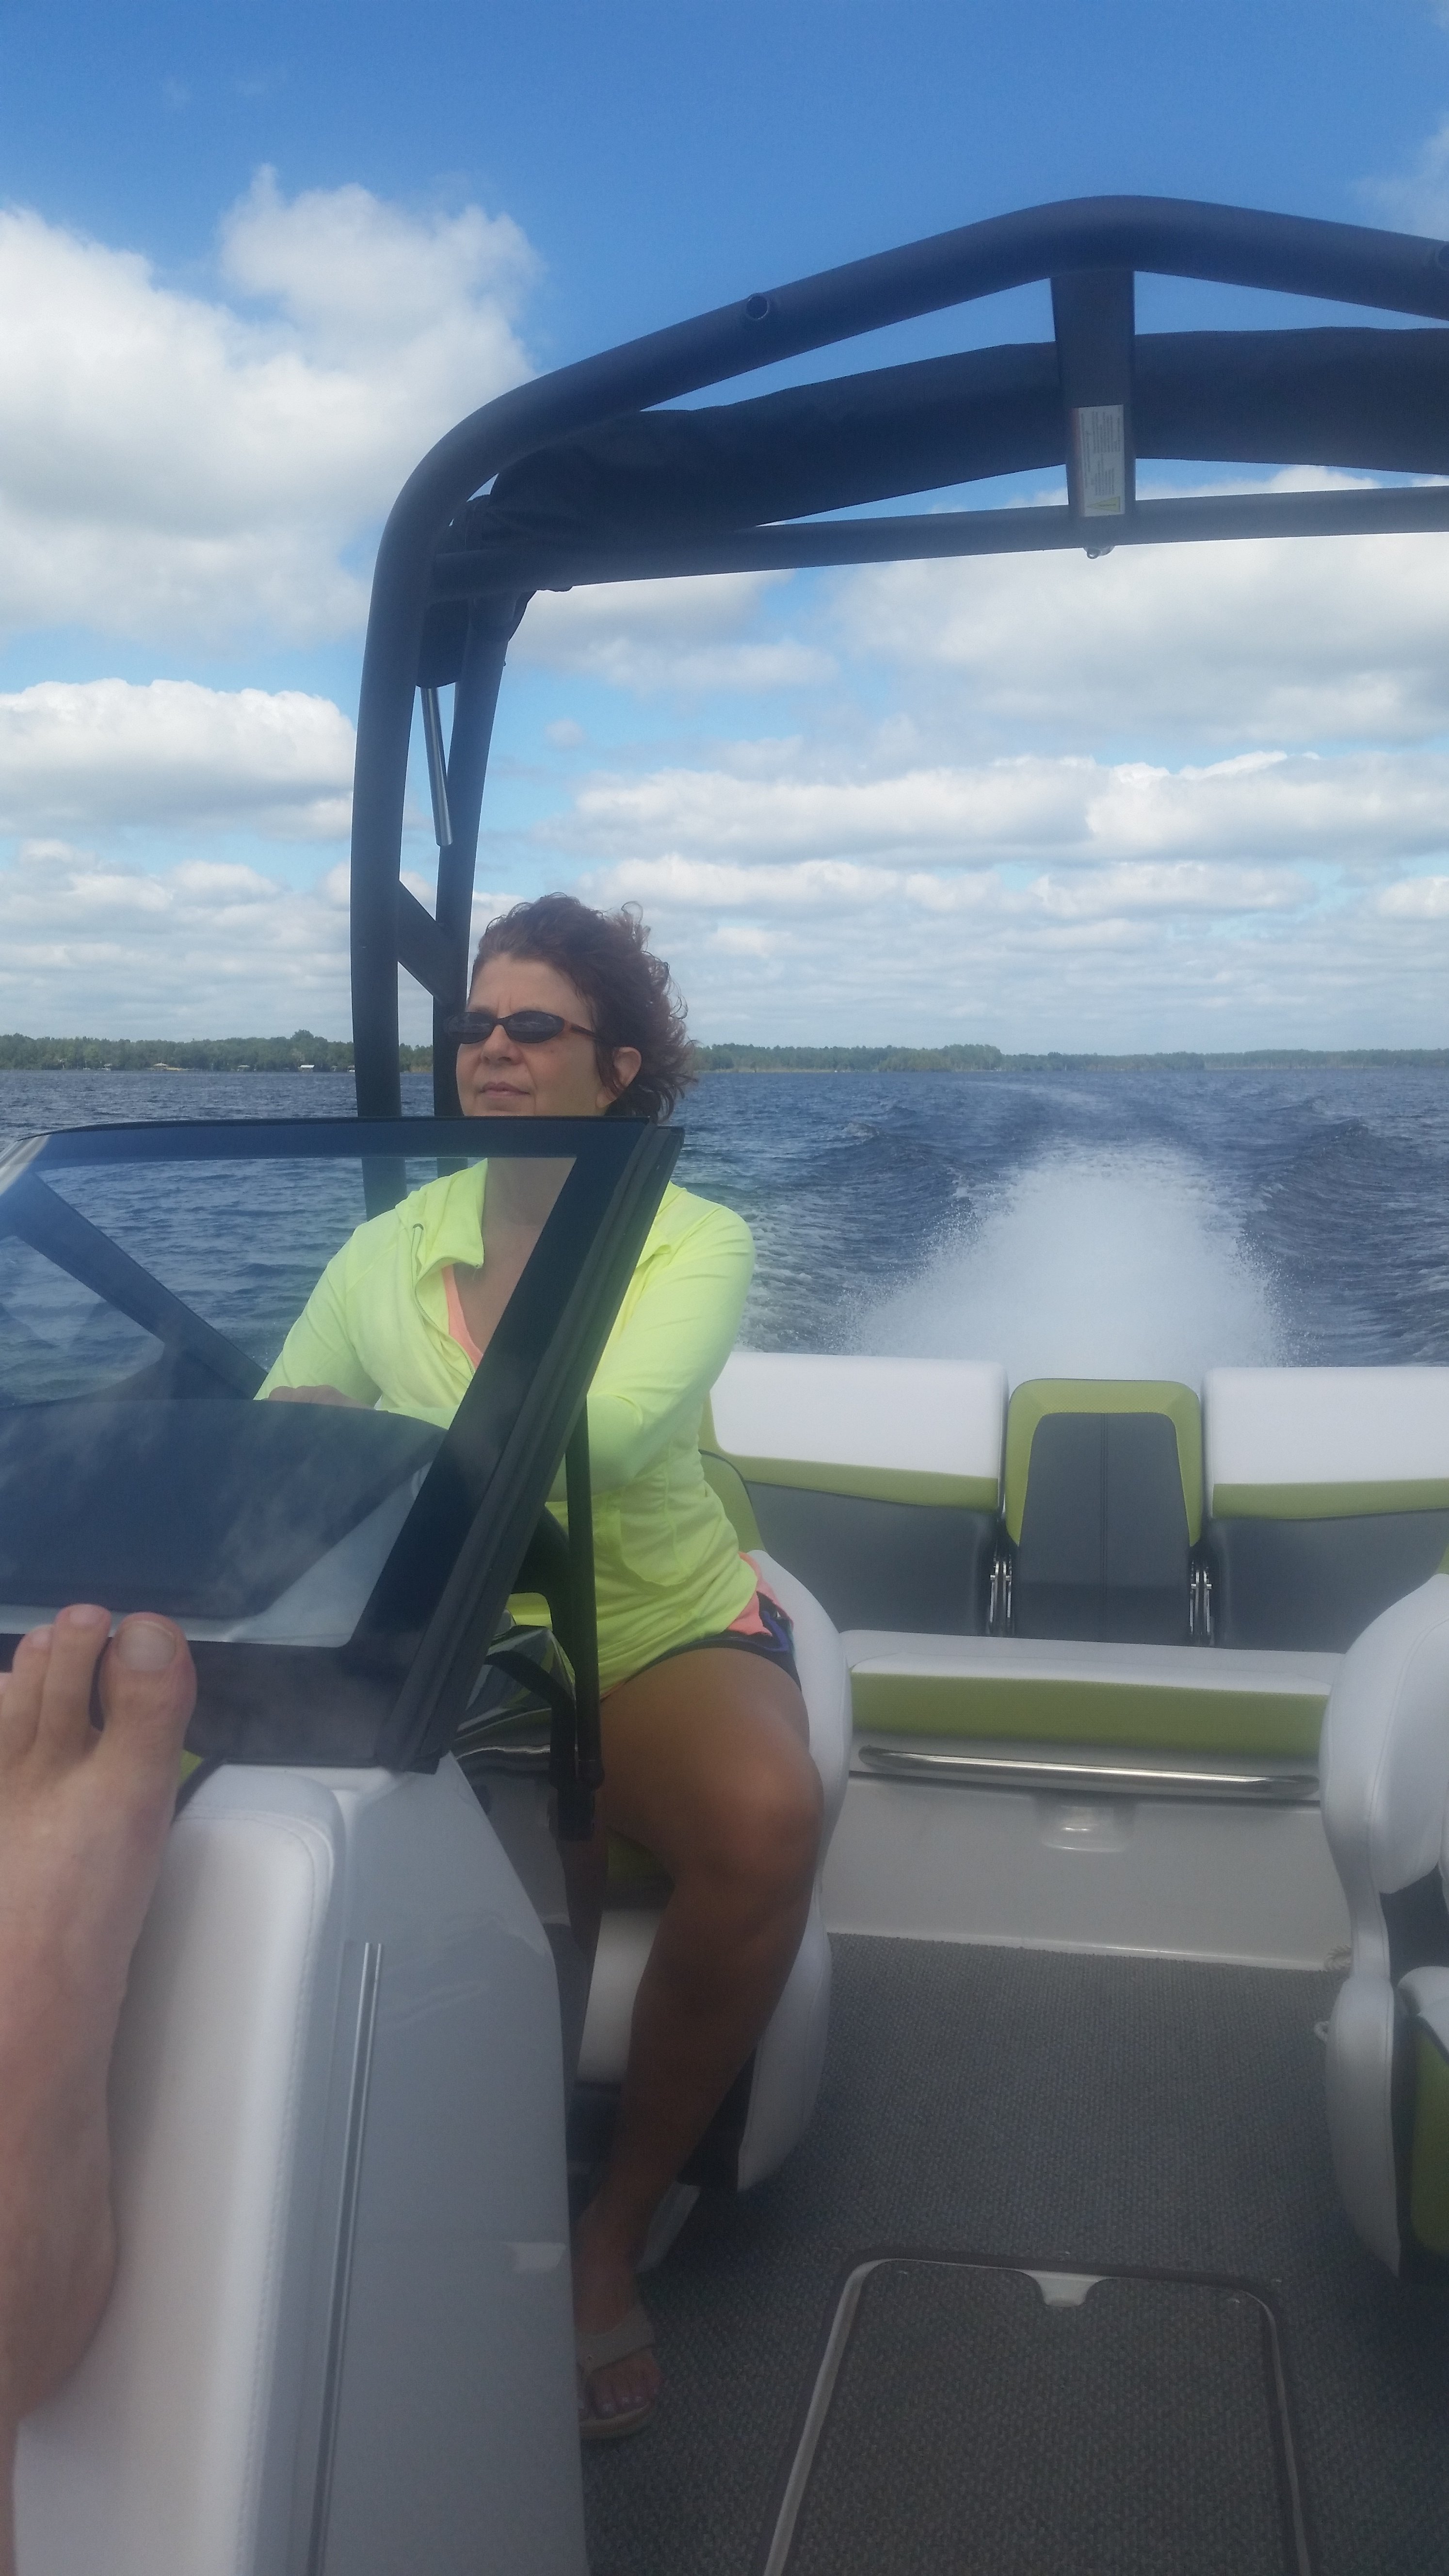 The wife at the helm